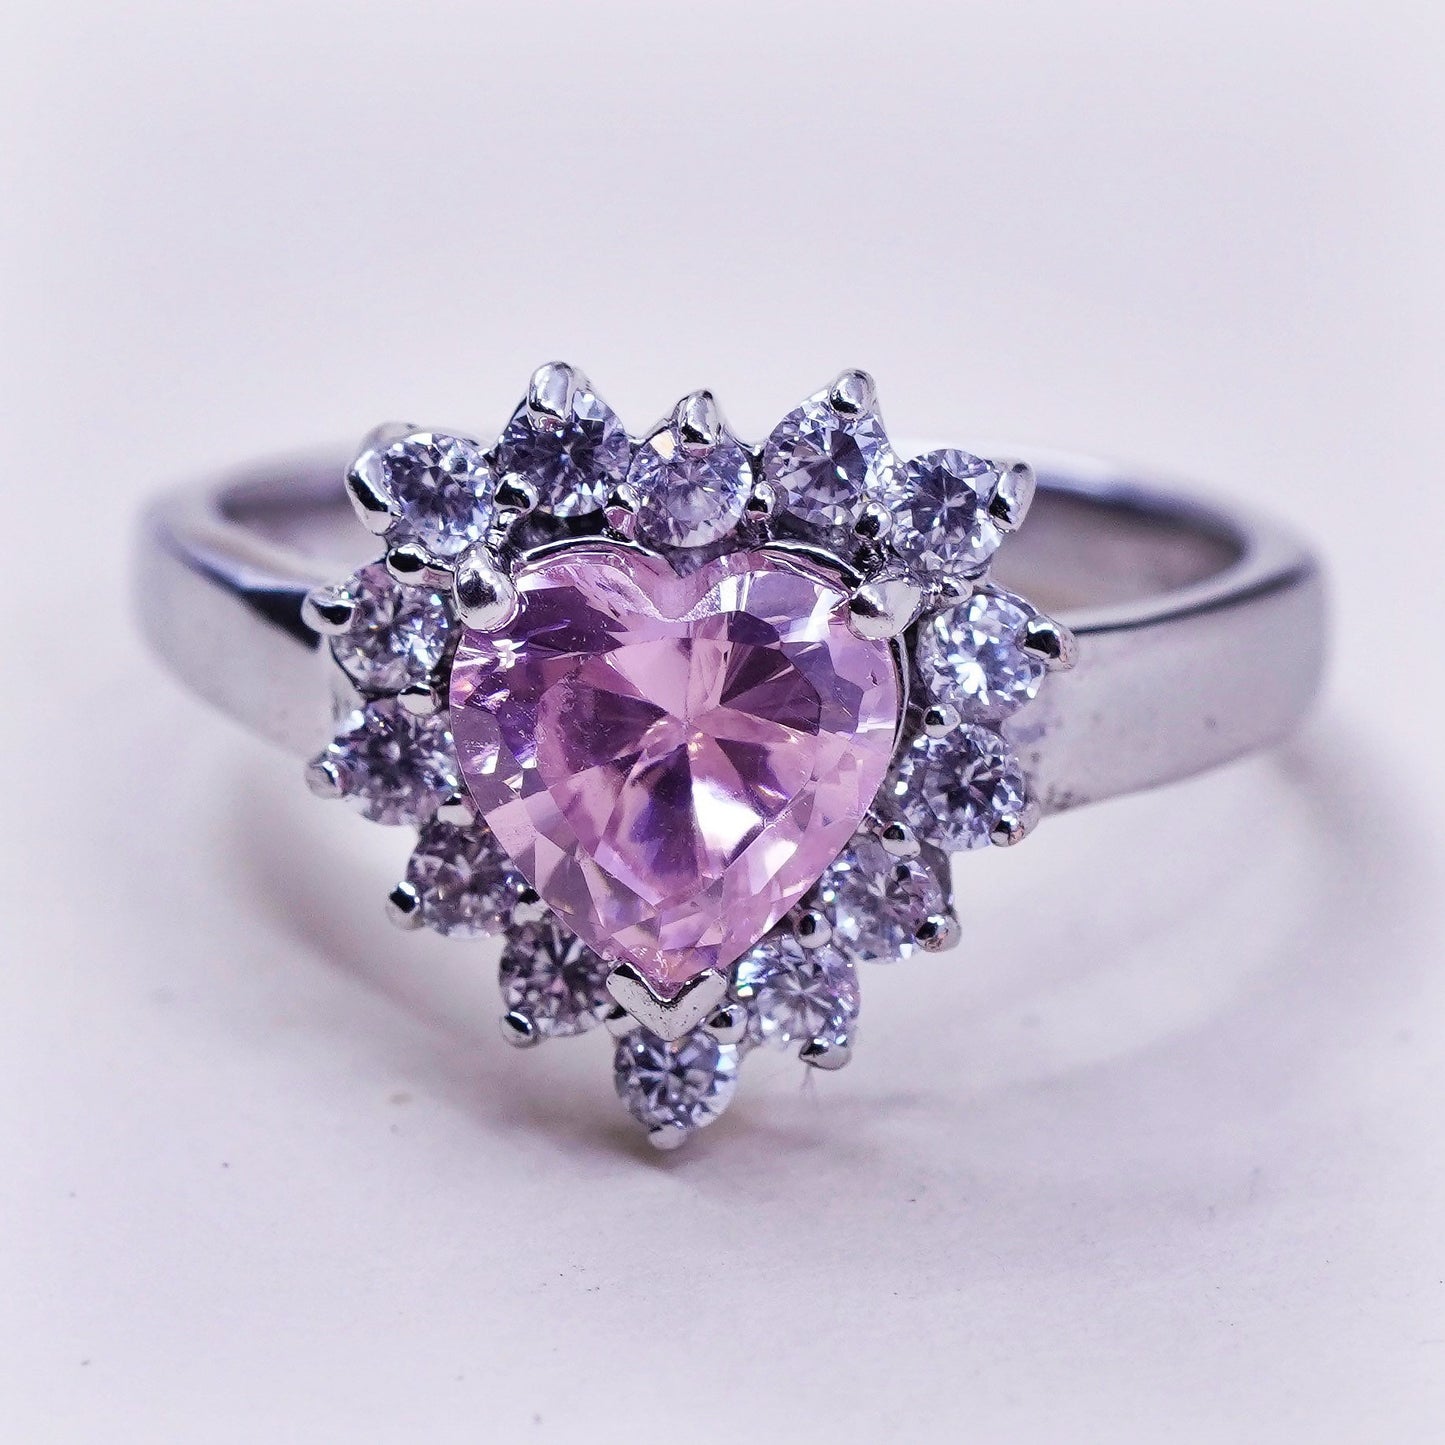 Size 6.25, 2.8g, vintage 12K white gold engagement pink heart ring with Cz